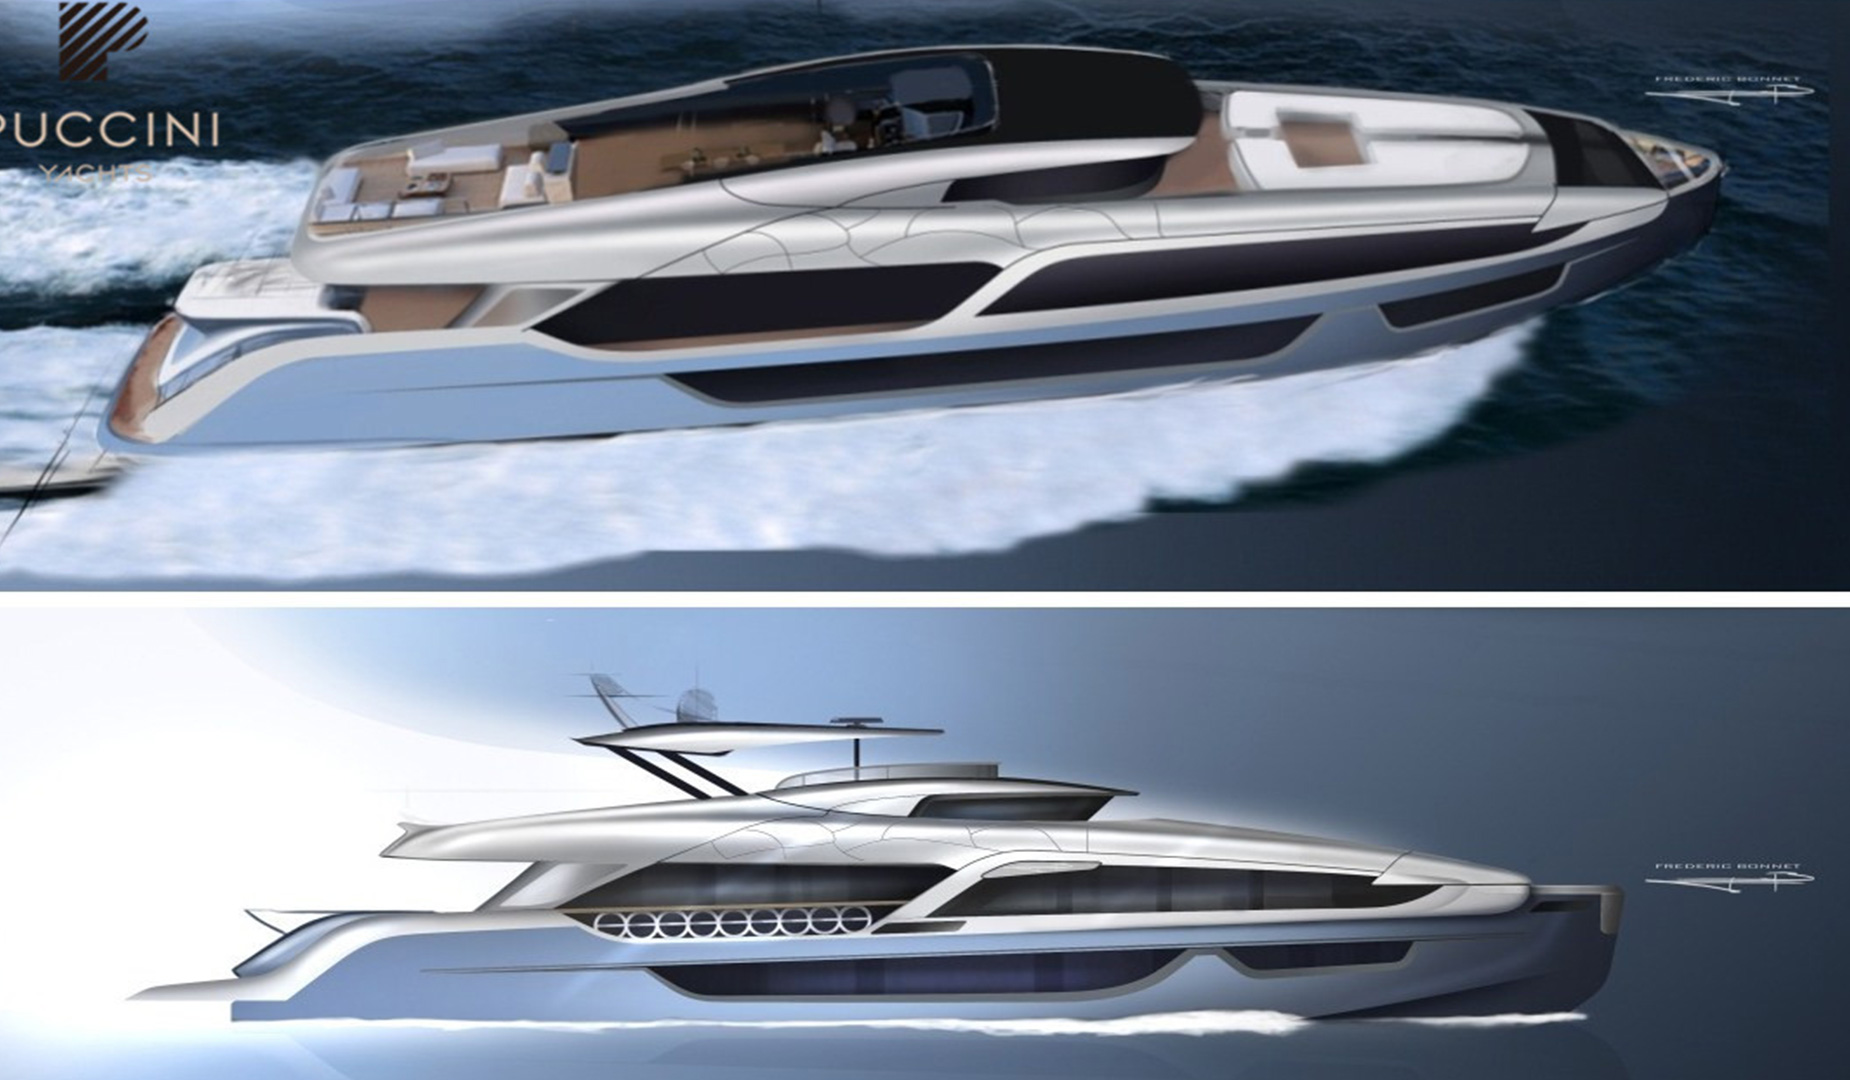 Puccini Yacht 110 Exterior